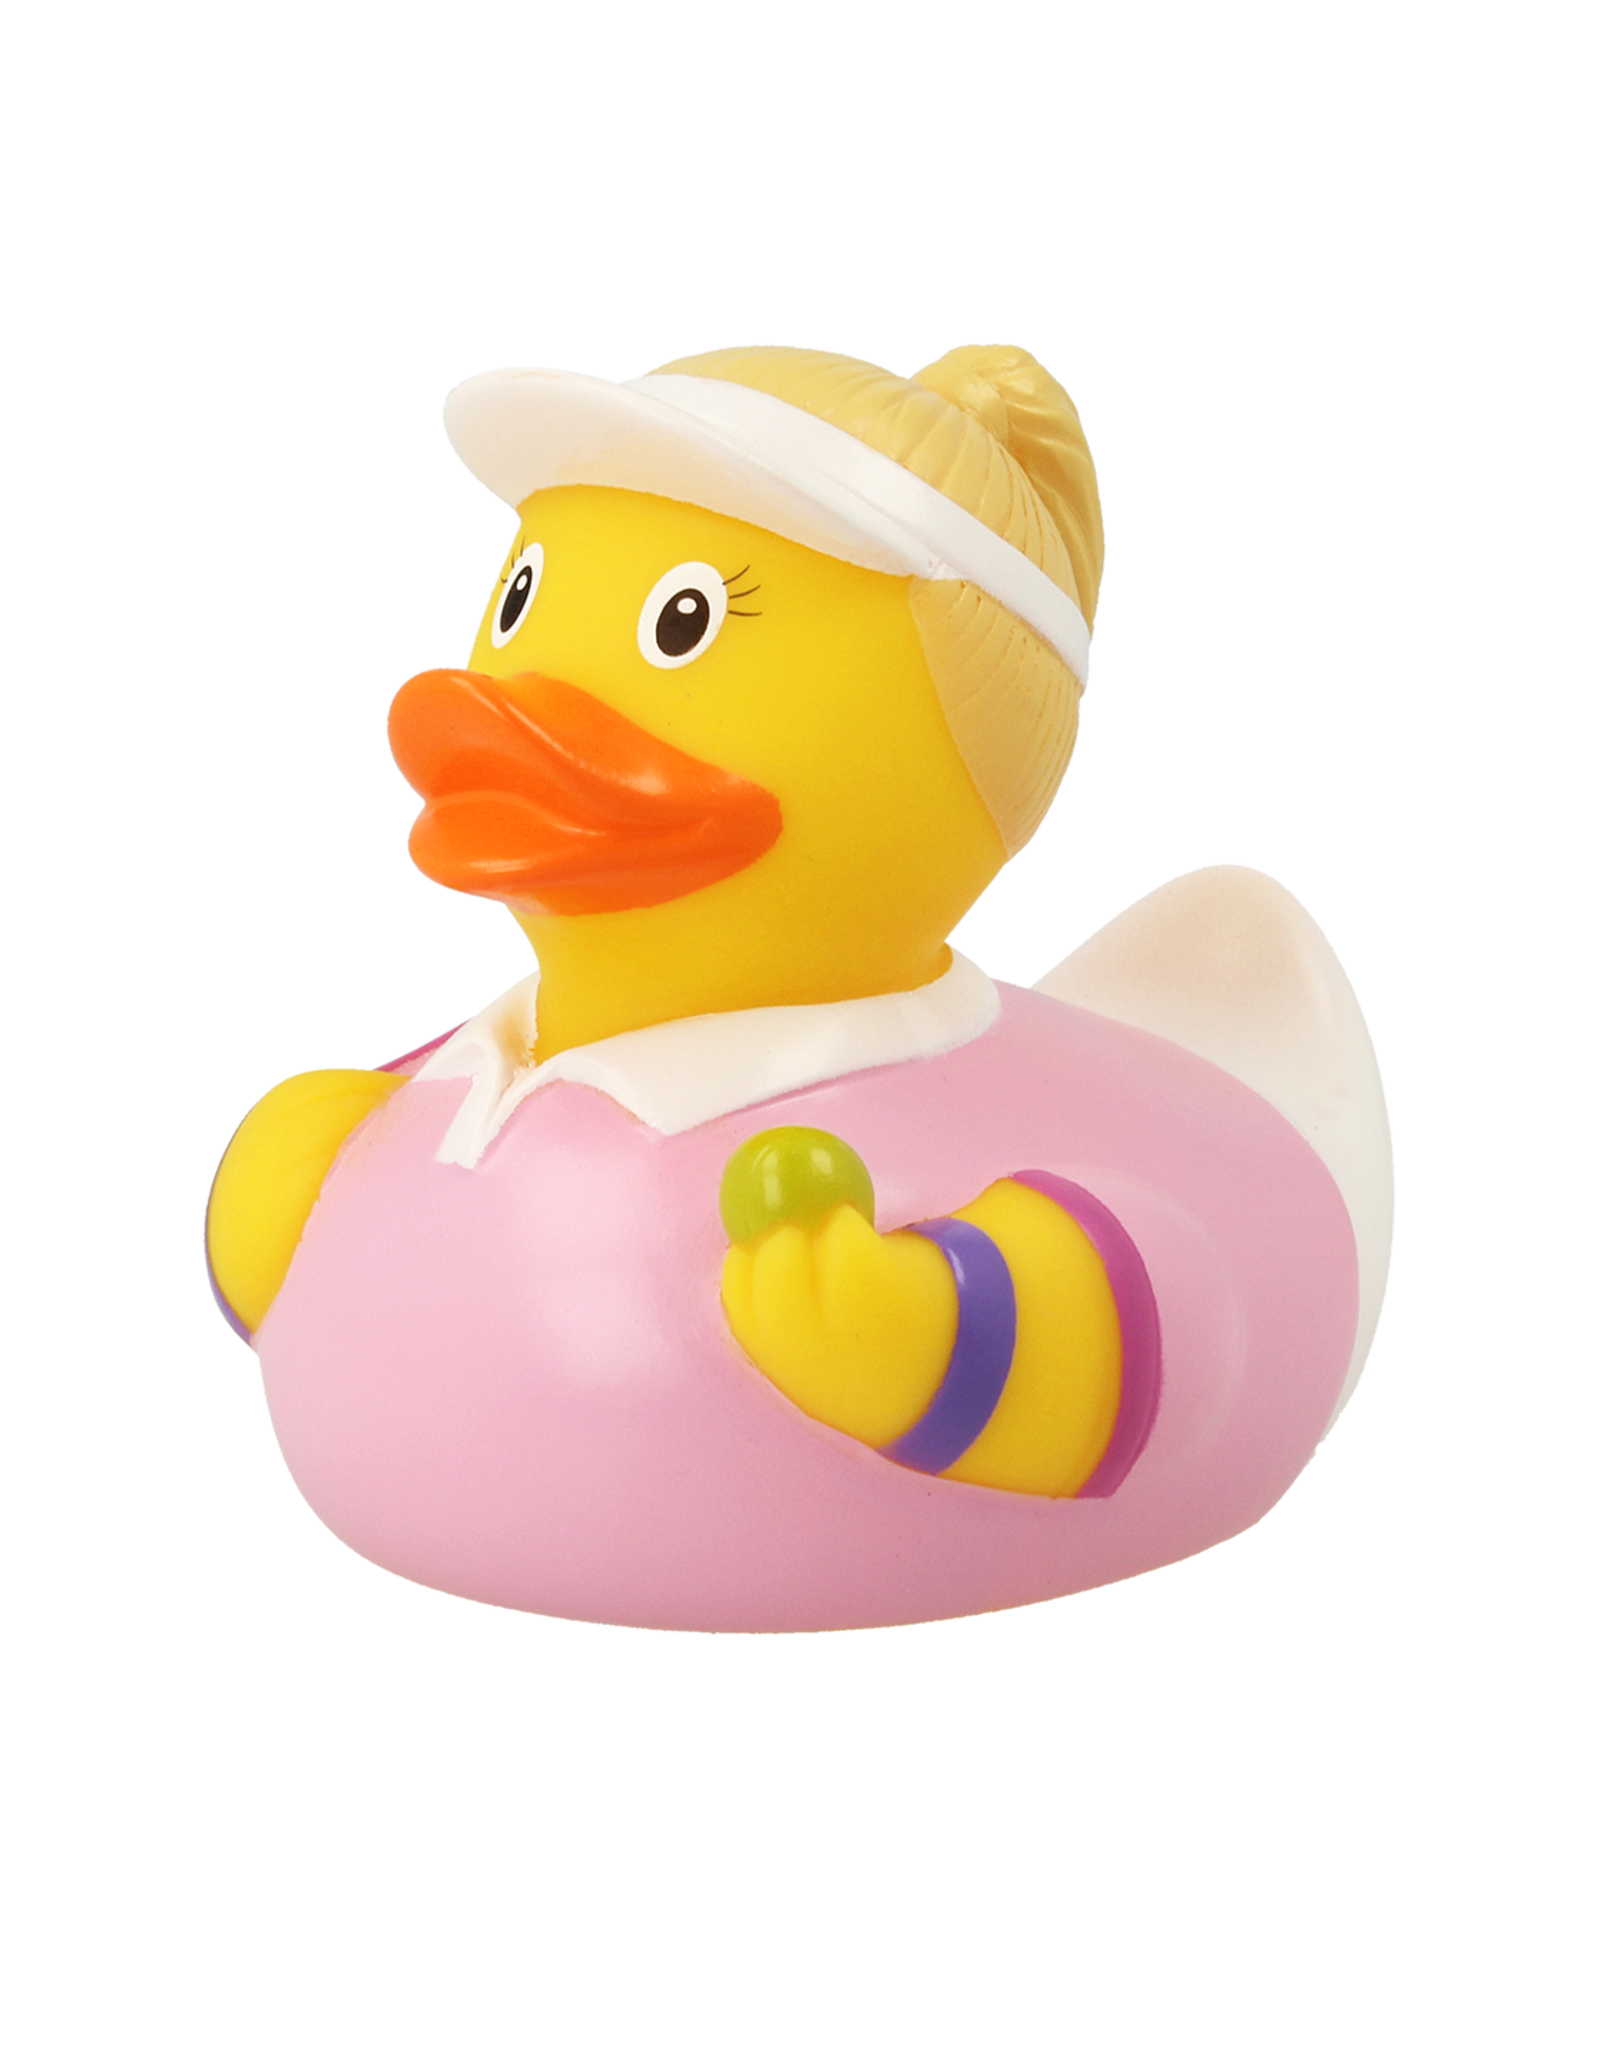 Lilalu Tennis Player Female Rubber Duck